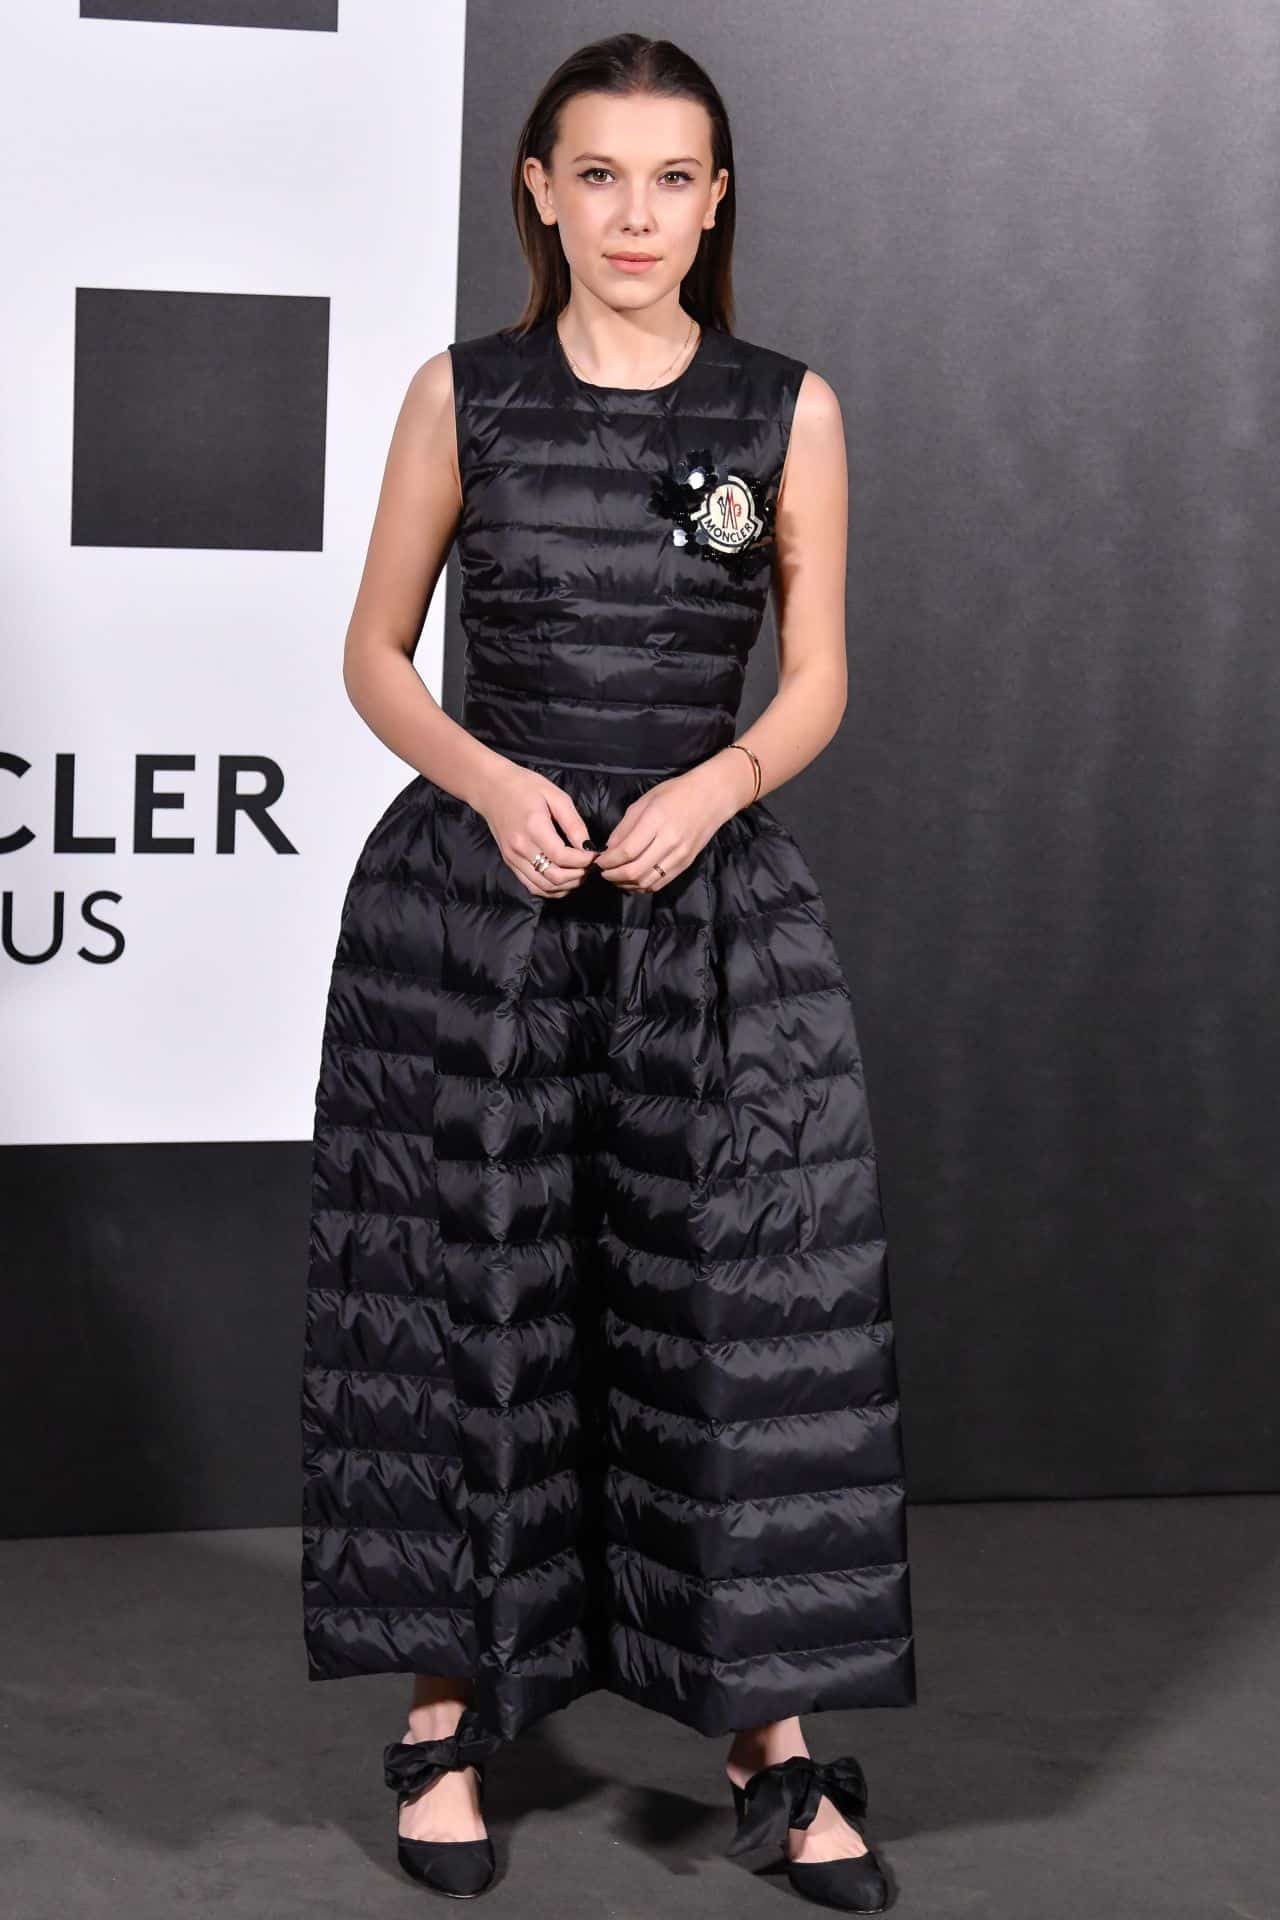 Millie Bobby Brown Wearing a Moncler Dress at a Moncler Party in Italy